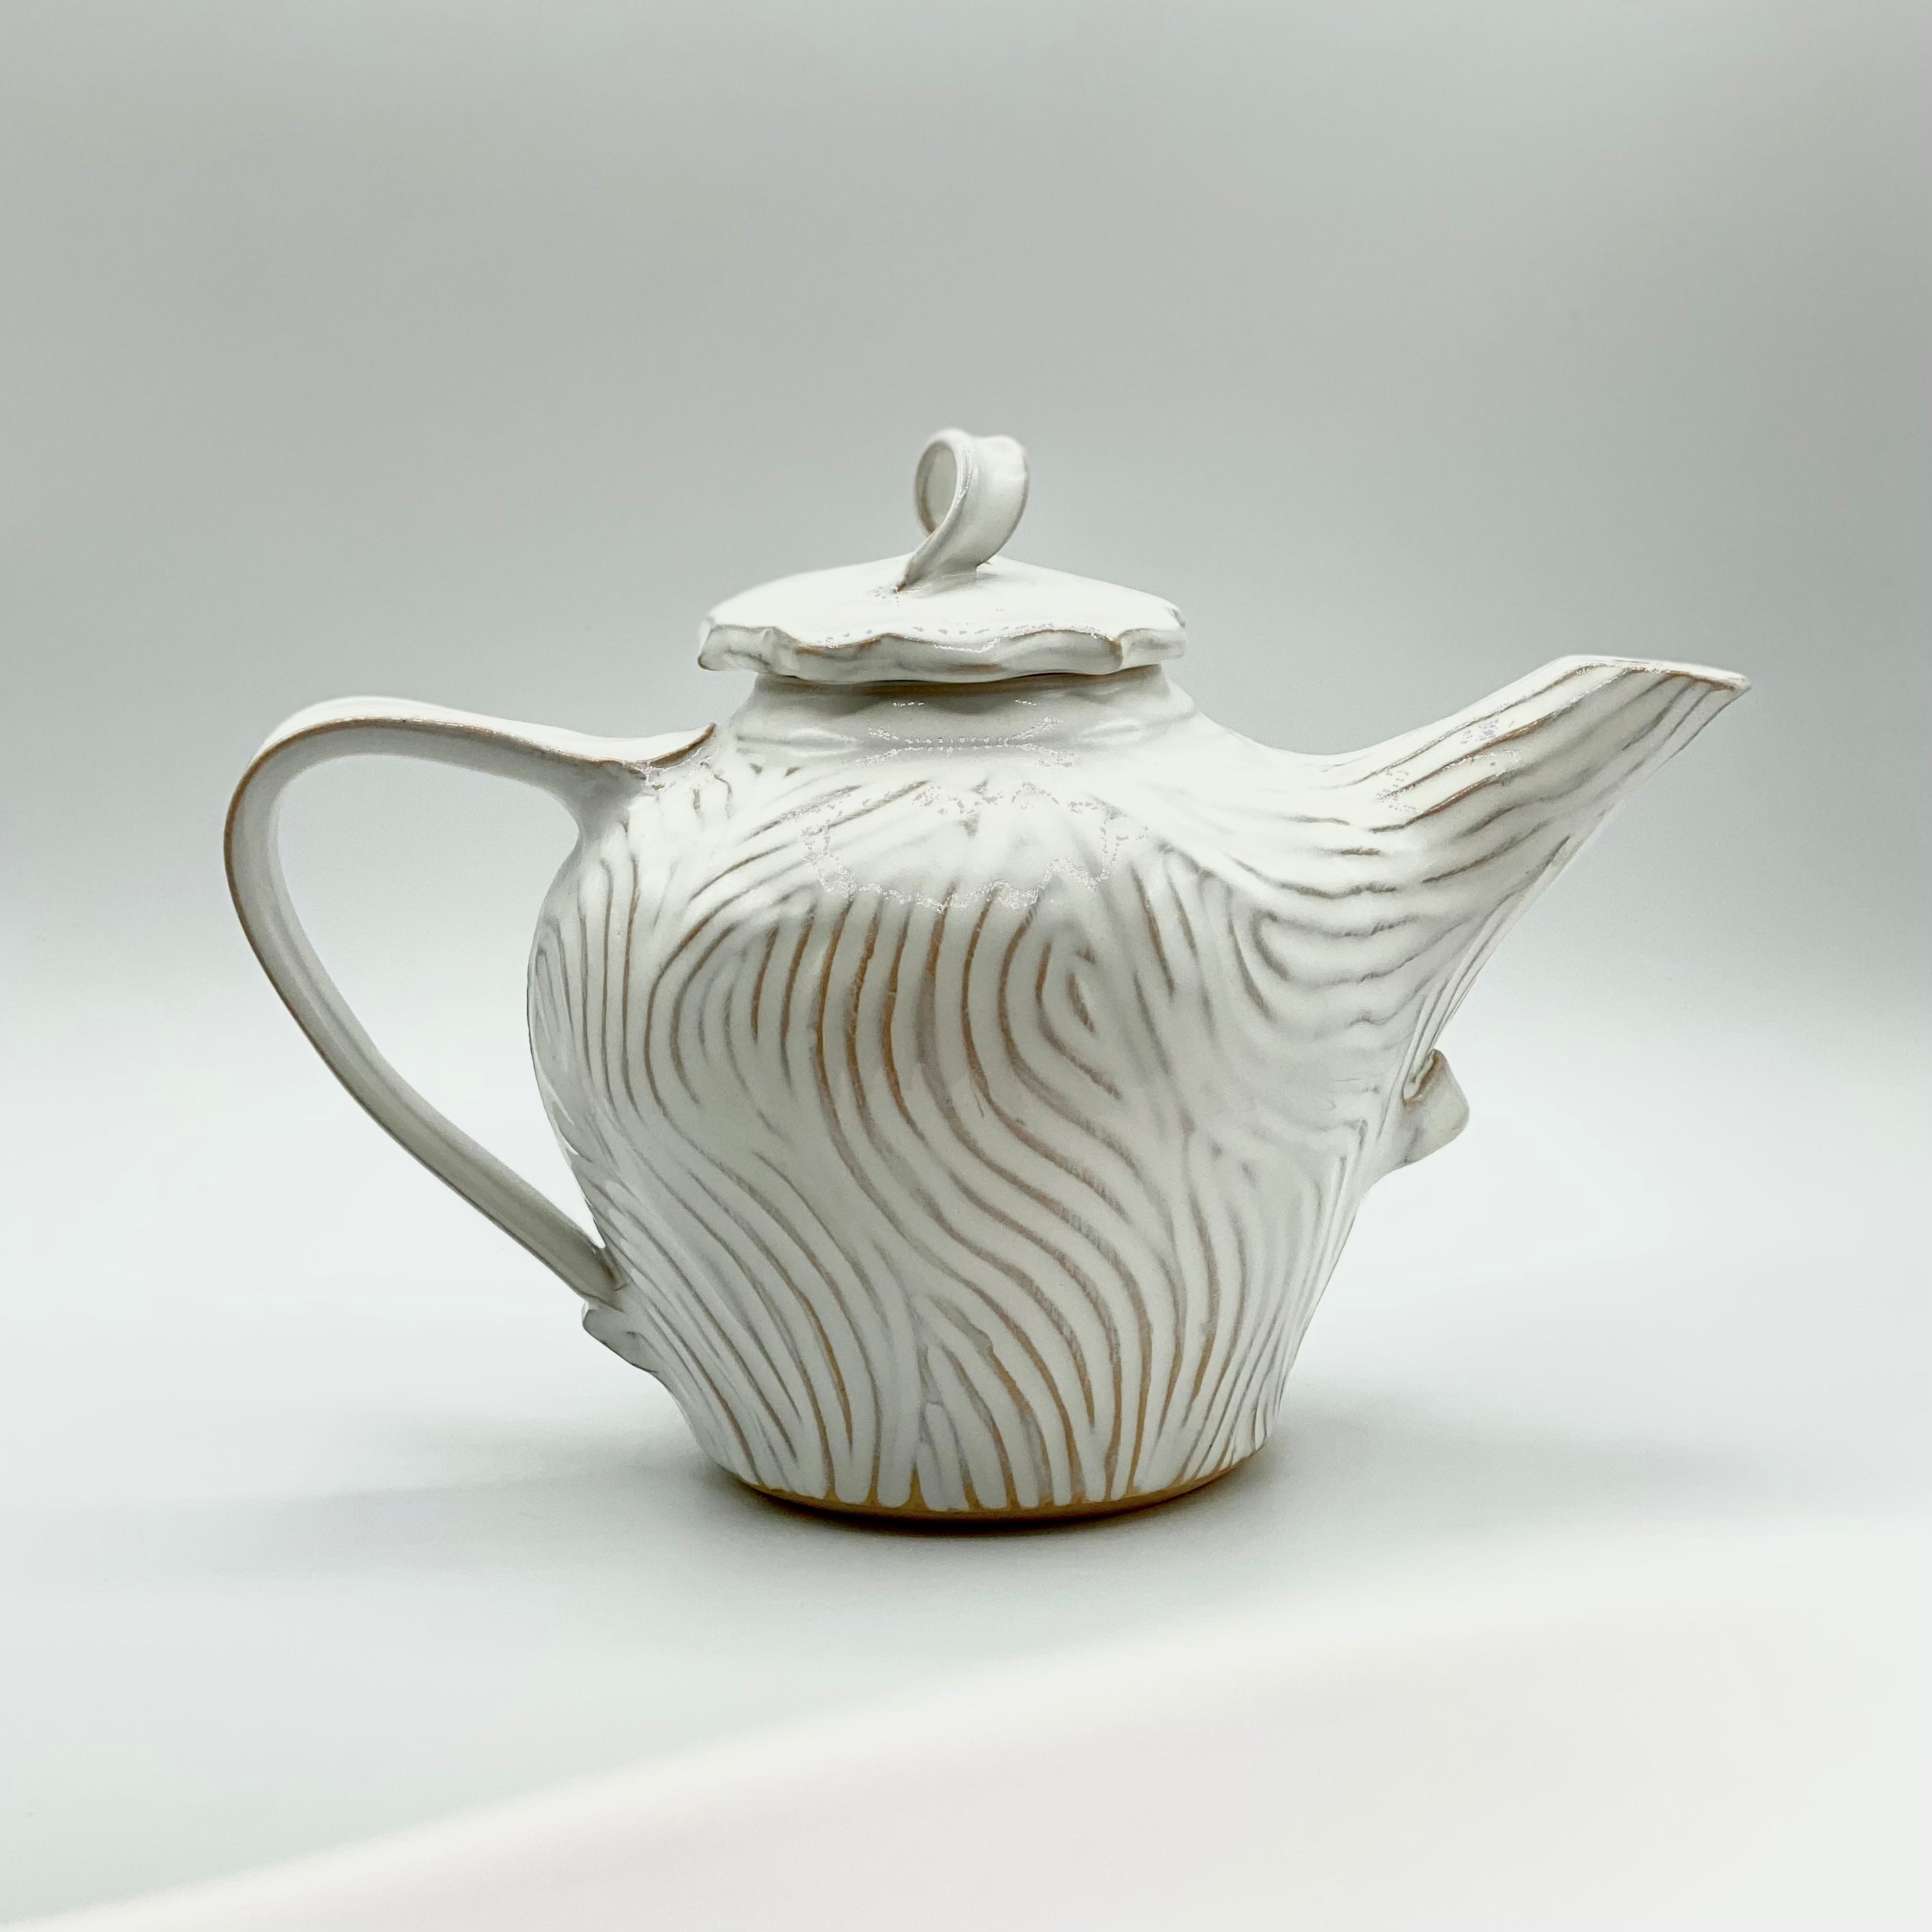 Teapot by Greig Pottery